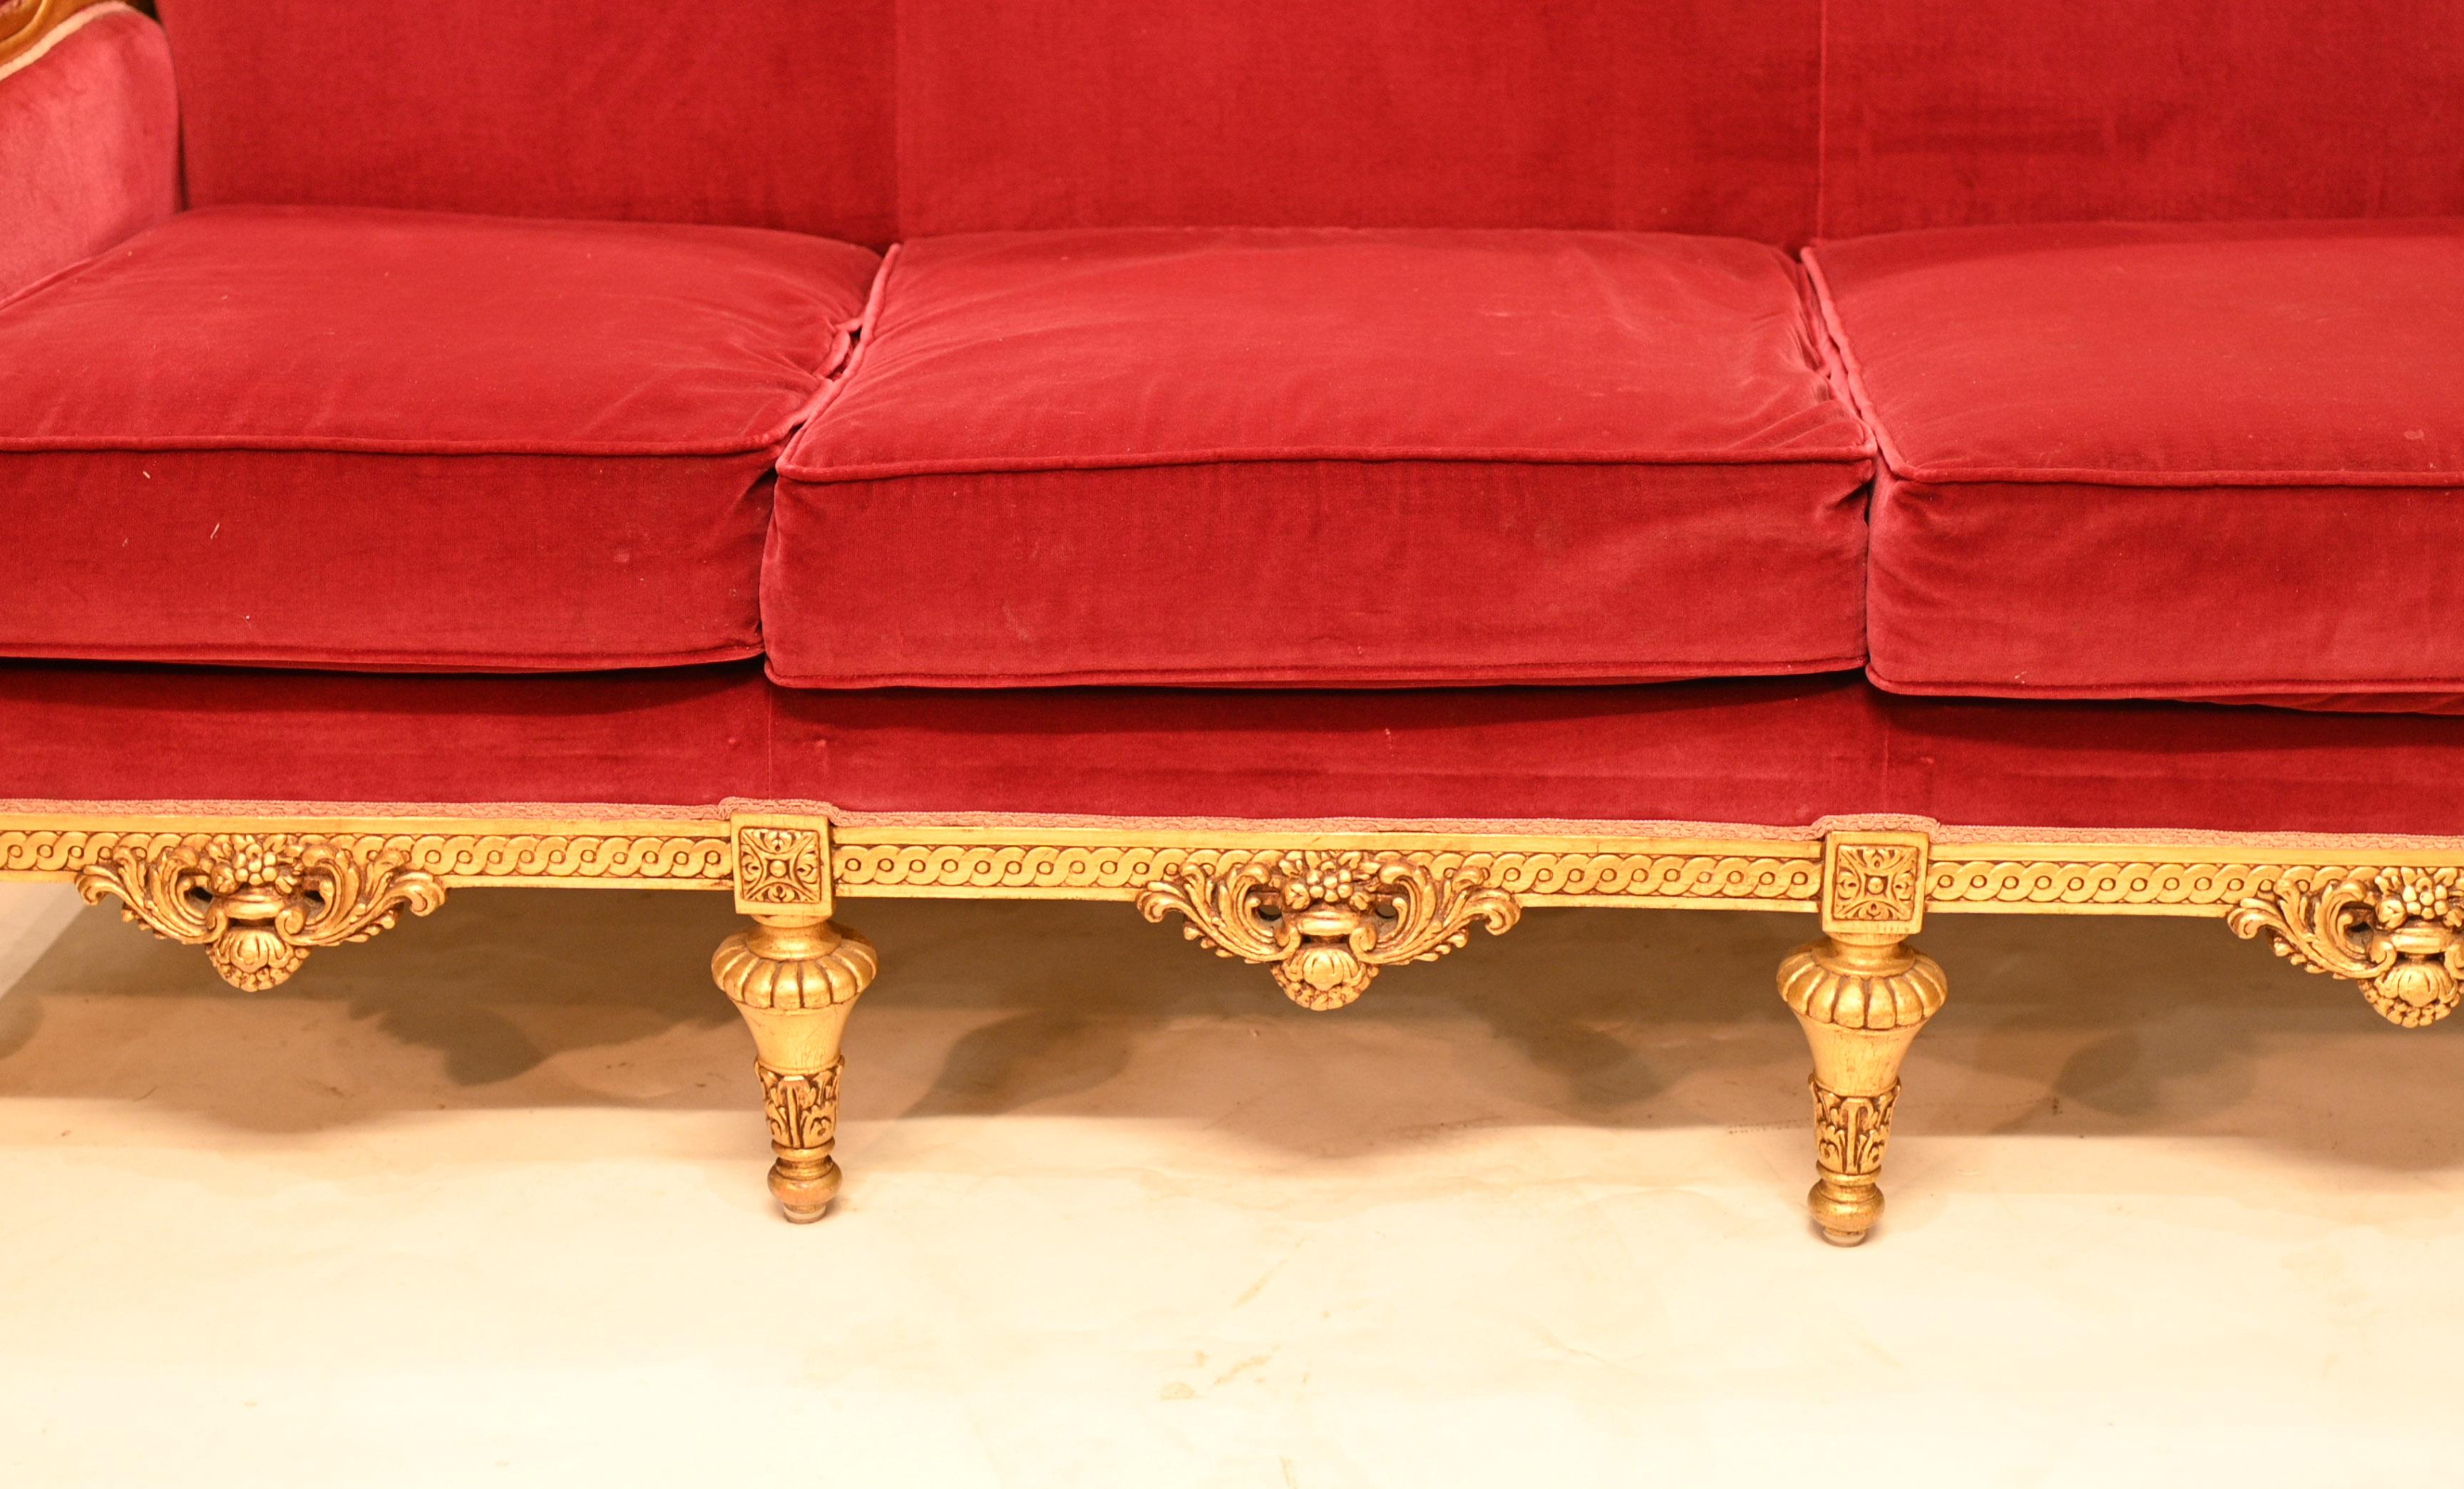  French Empire Sofa Giltwood Couch Seat  For Sale 1